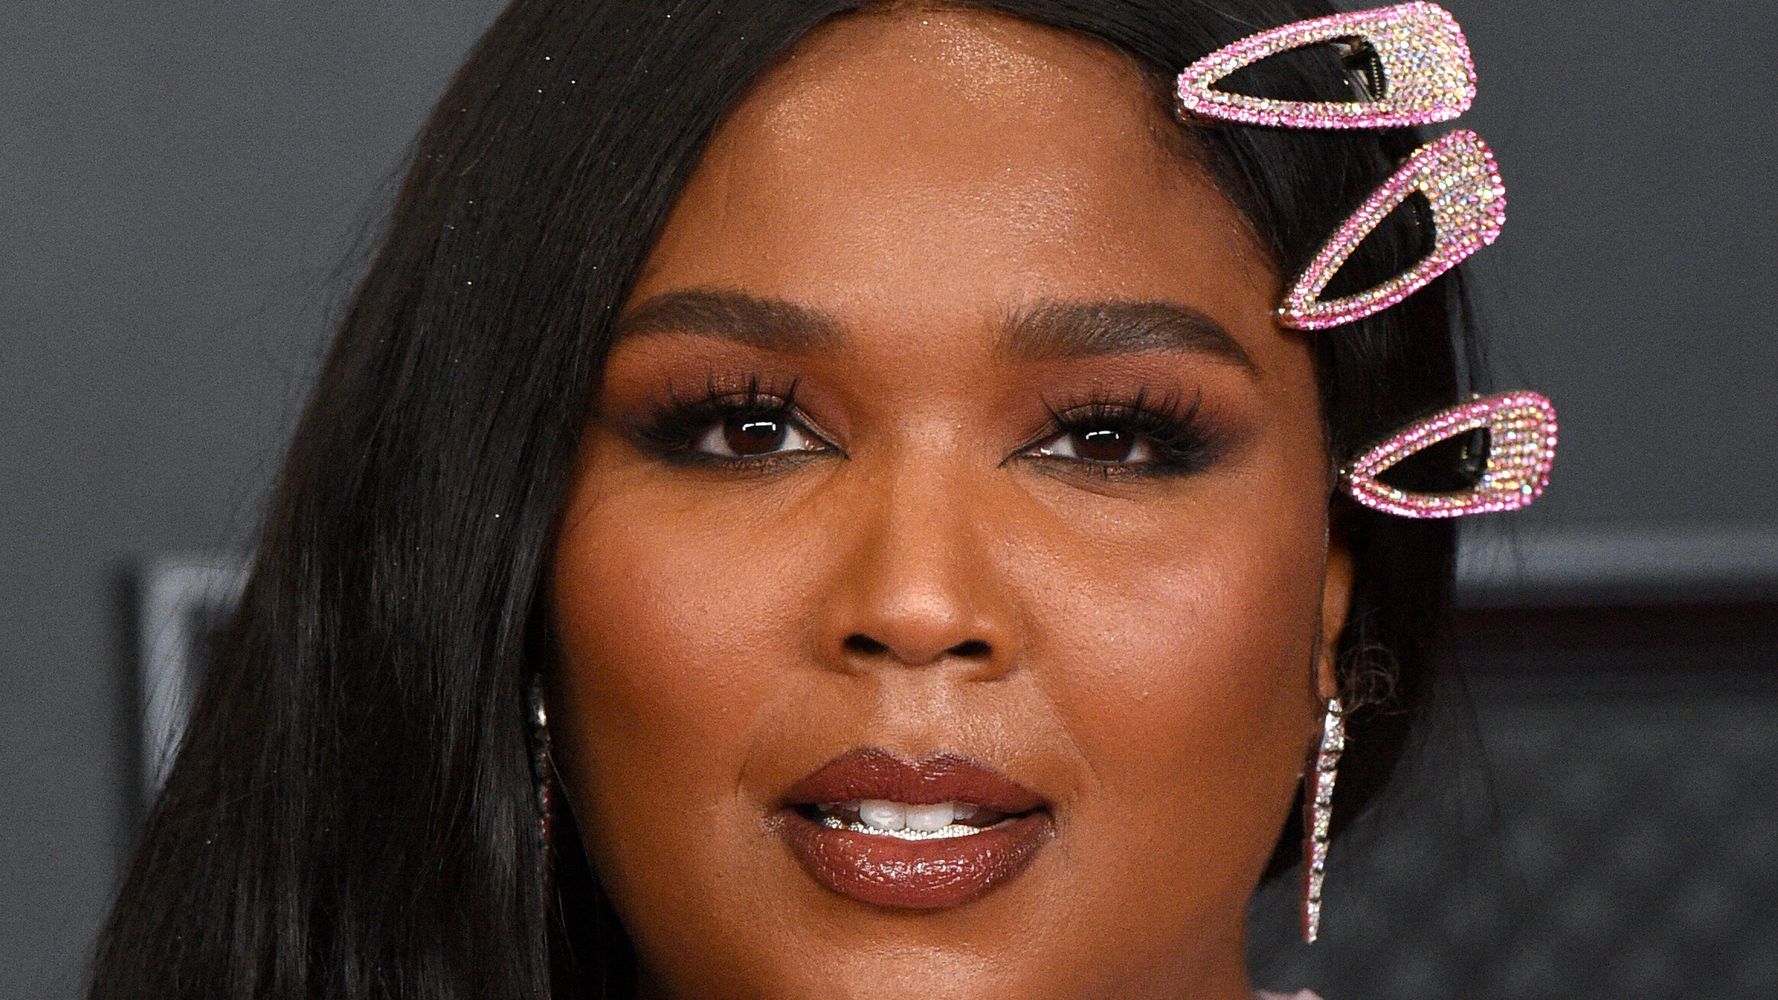 Lizzo Proves Hot Pink Is Her Color With New Pixie Cut Hairstyle